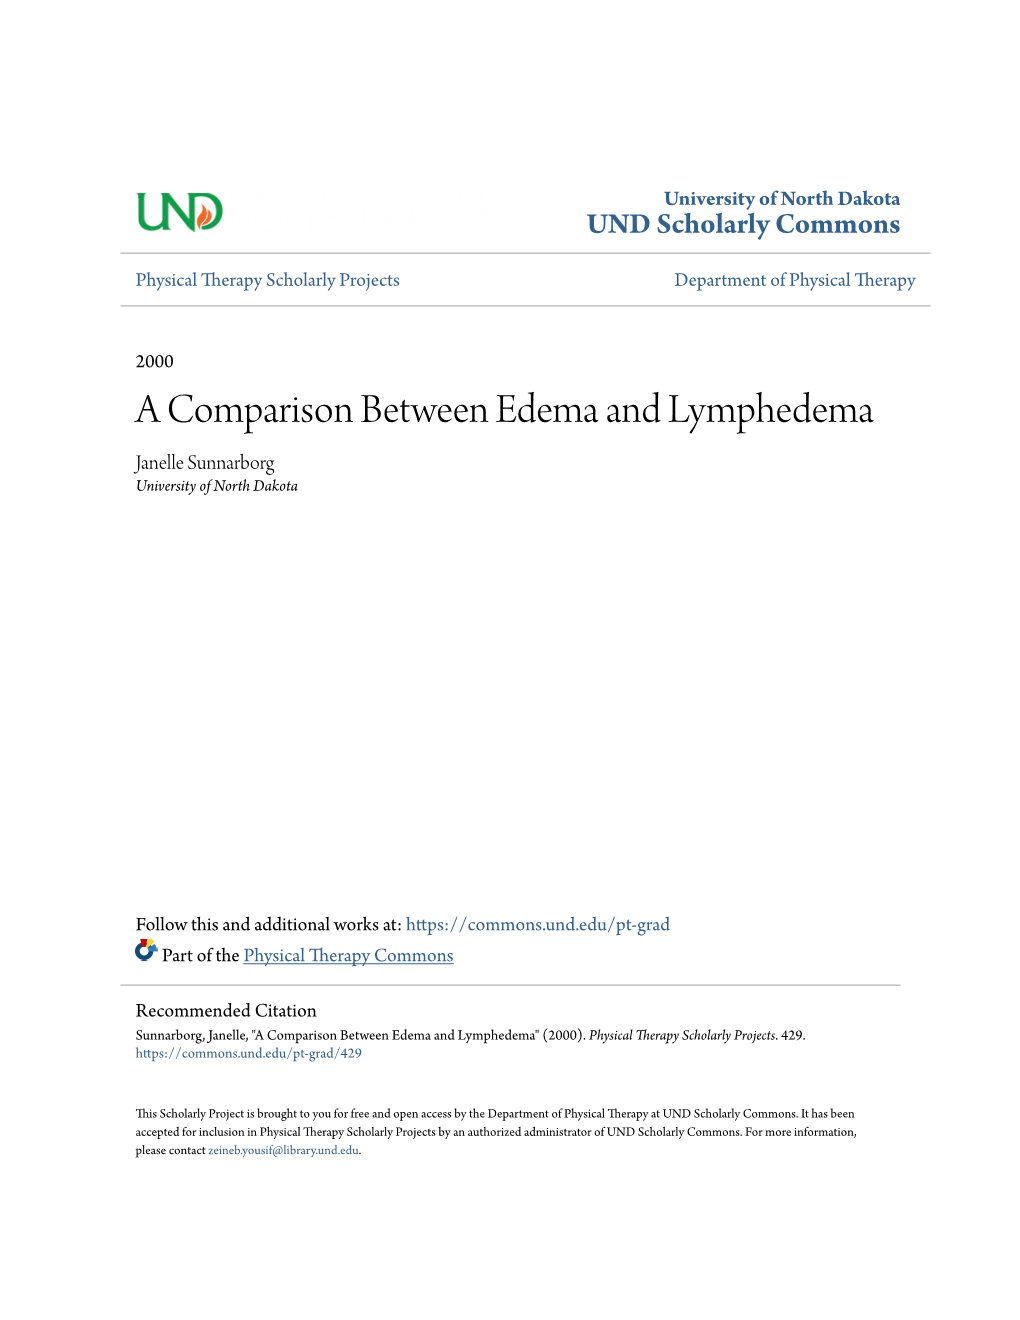 A Comparison Between Edema and Lymphedema Janelle Sunnarborg University of North Dakota